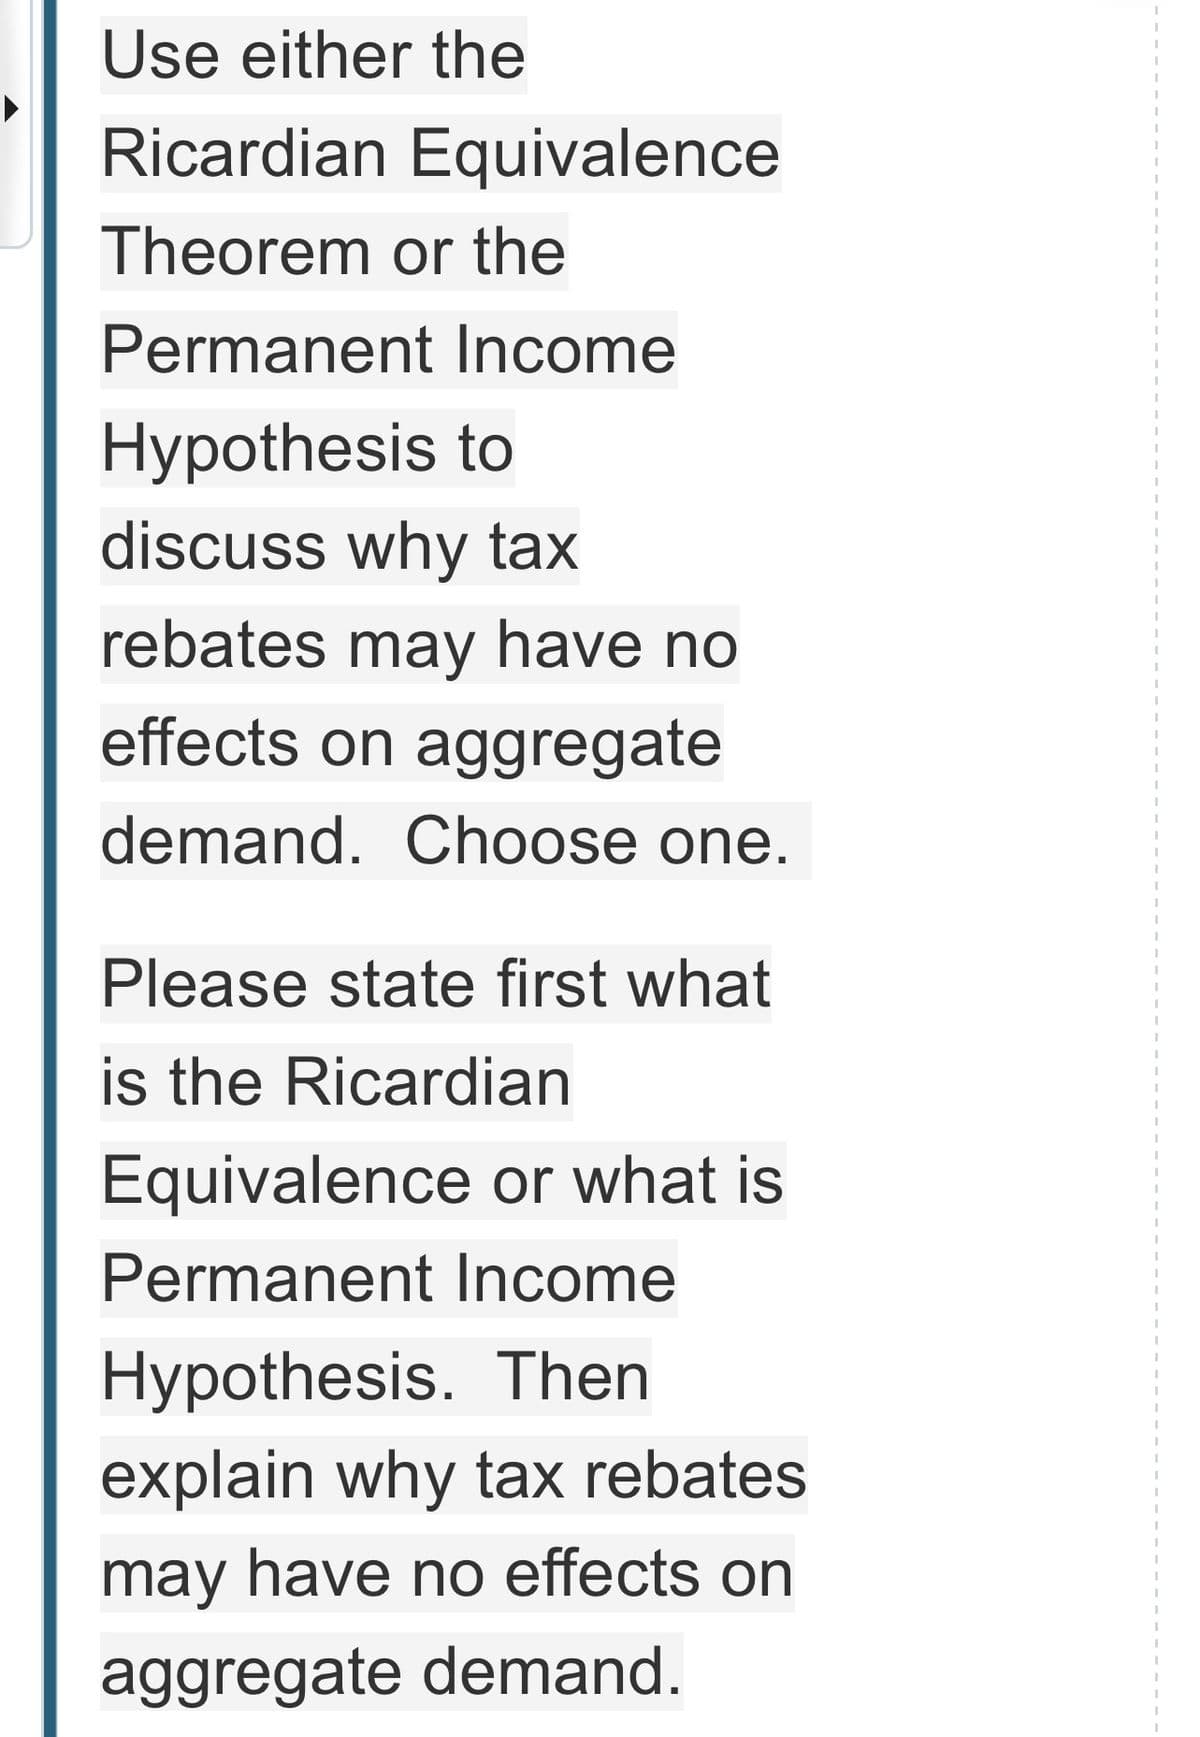 Use either the
Ricardian Equivalence
Theorem or the
Permanent Income
Hypothesis to
discuss why tax
rebates may have no
effects on aggregate
demand. Choose one.
Please state first what
is the Ricardian
Equivalence or what is
Permanent Income
Hypothesis. Then
explain why tax rebates
may have no effects on
aggregate demand.